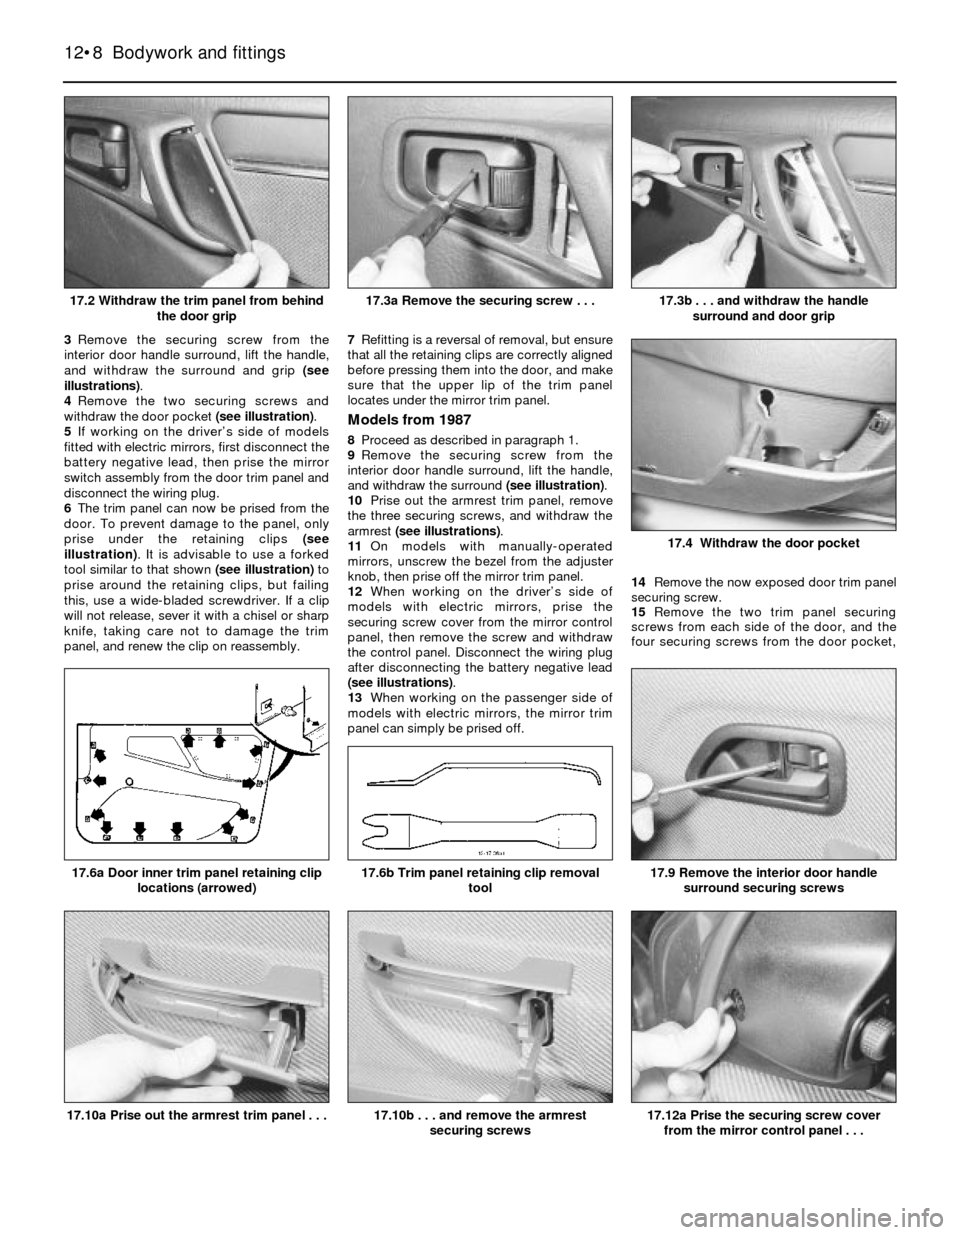 FORD SIERRA 1990 2.G Bodywork And Fittings Workshop Manual 3Remove the securing screw from the
interior door handle surround, lift the handle,
and withdraw the surround and grip (see
illustrations).
4Remove the two securing screws and
withdraw the door pocket